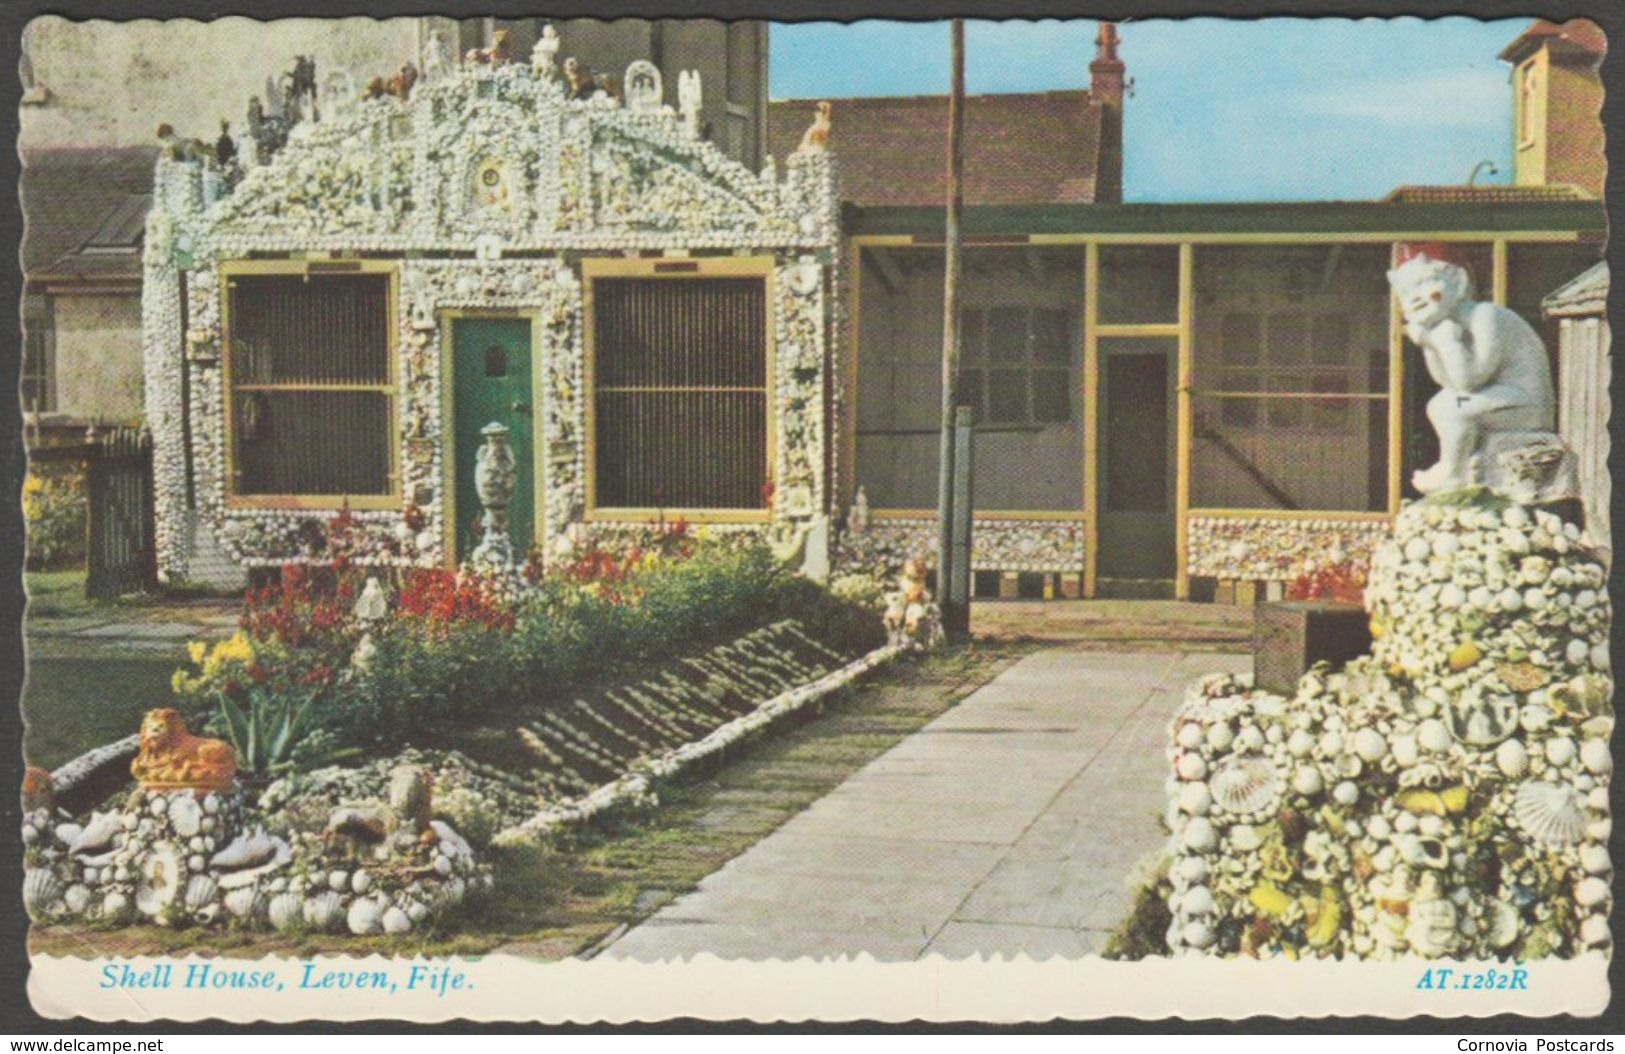 The Shell House, Leven, Fife, C.1950s - Valentine's Postcard - Fife